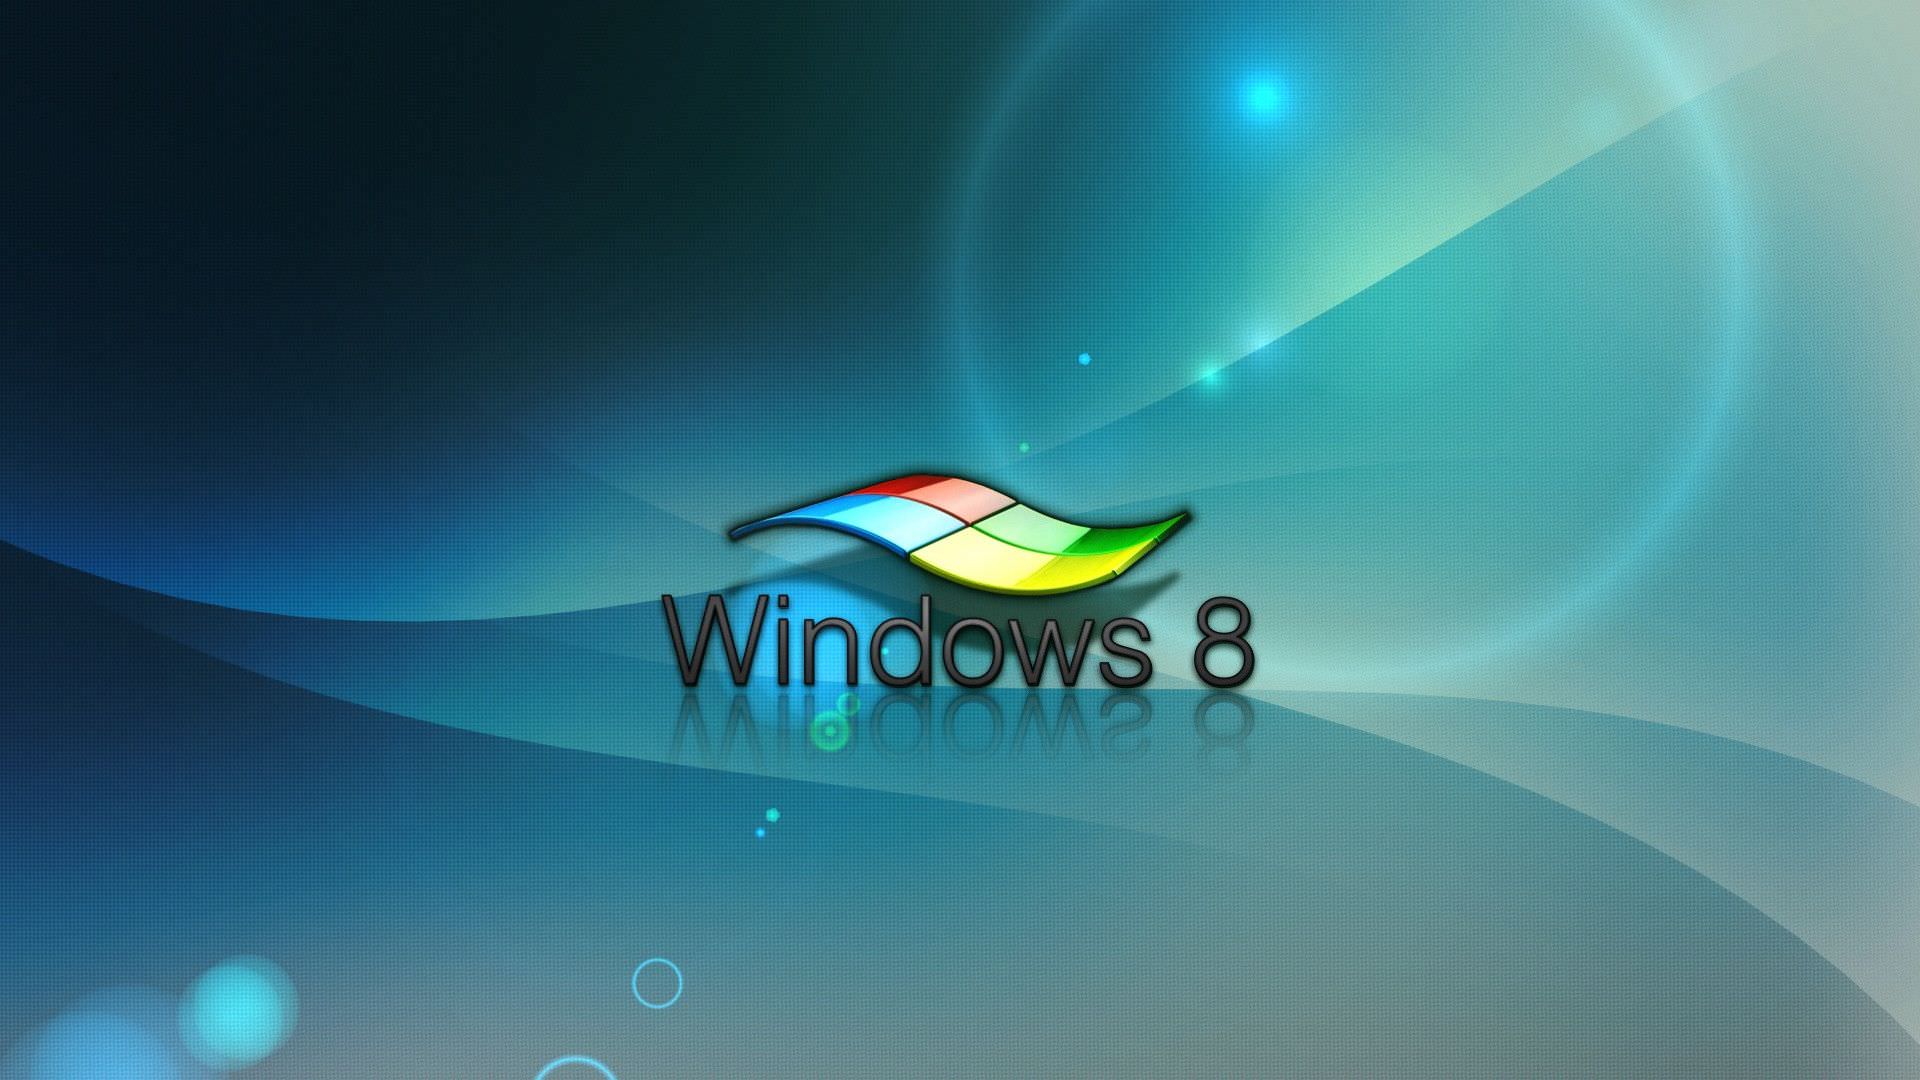 Epic Windows 8 Wallpaper Android 81 For dual screen wallpaper